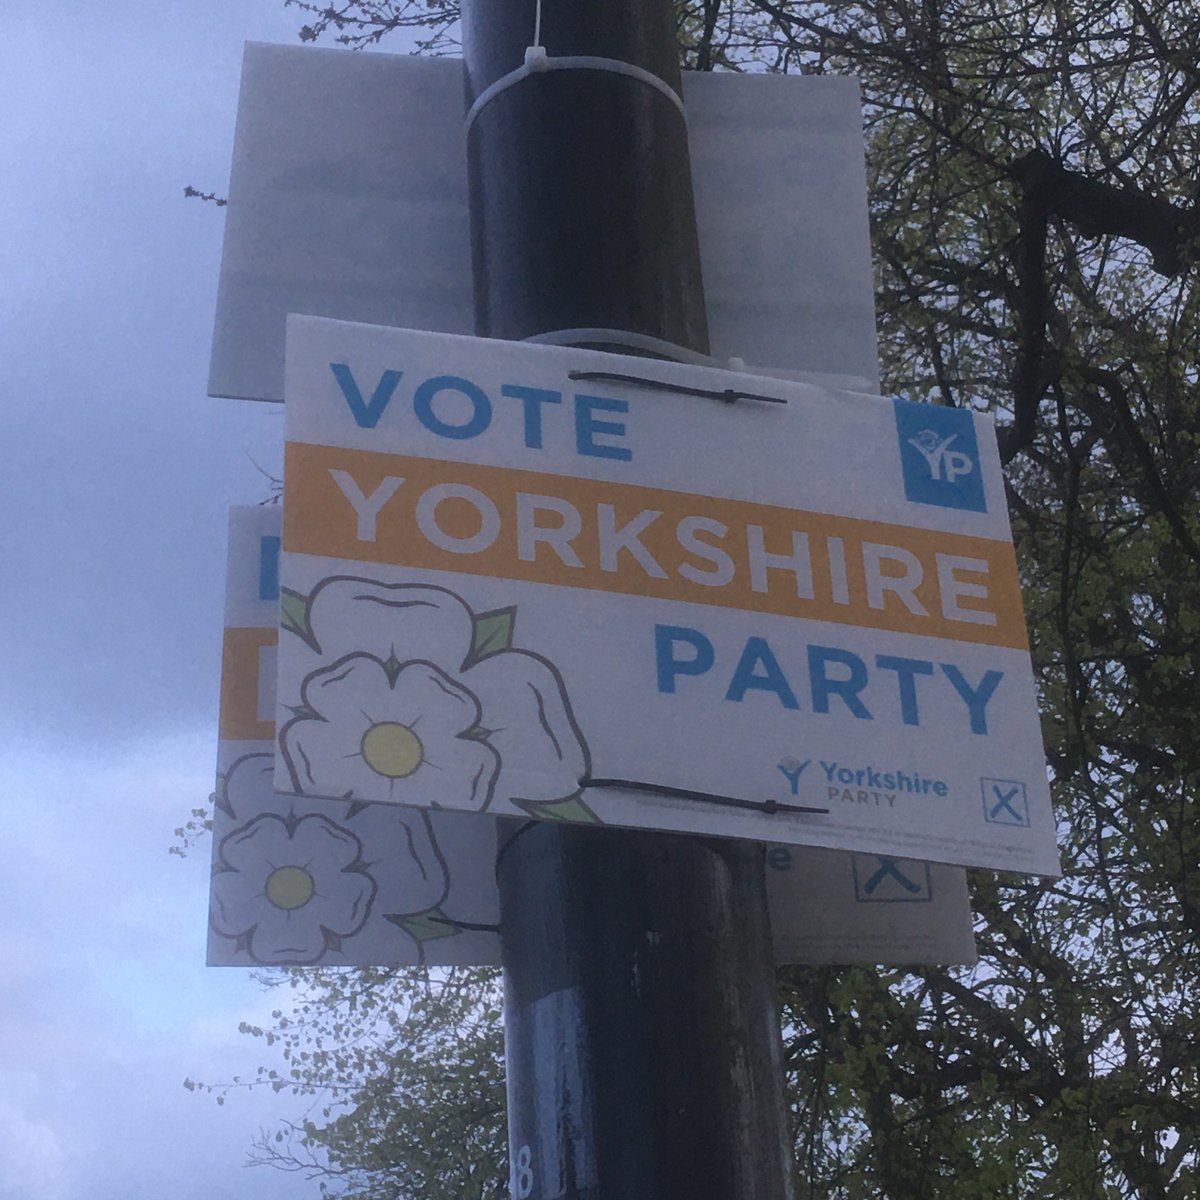 For a West Yorkshire Metro, you know what to do #NewTransportDealforYorkshire #DrBob4Mayor #YorkshireParty